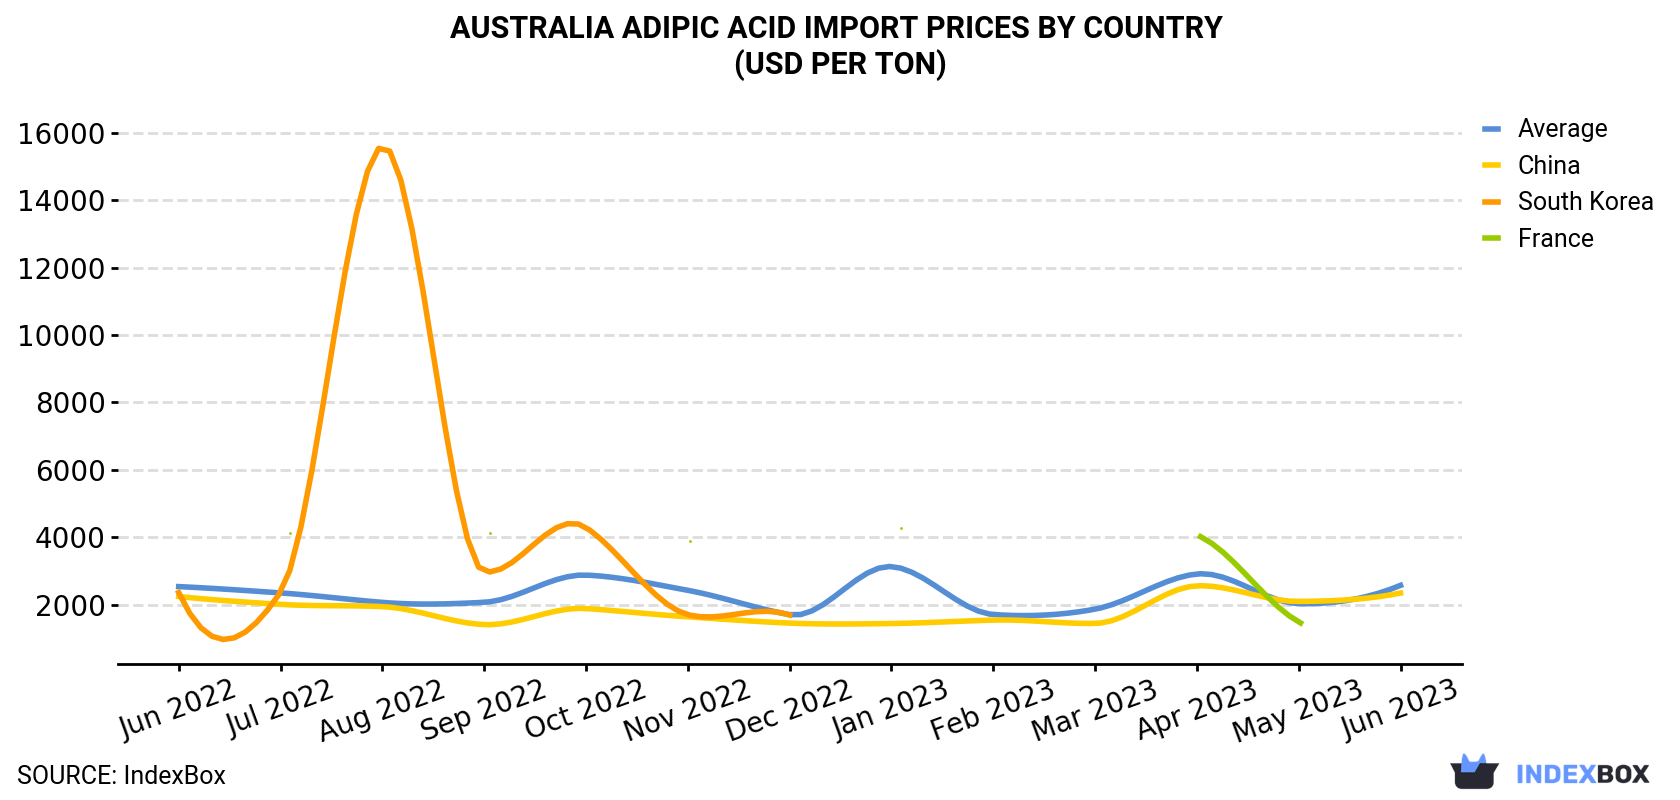 Australia Adipic Acid Import Prices By Country (USD Per Ton)